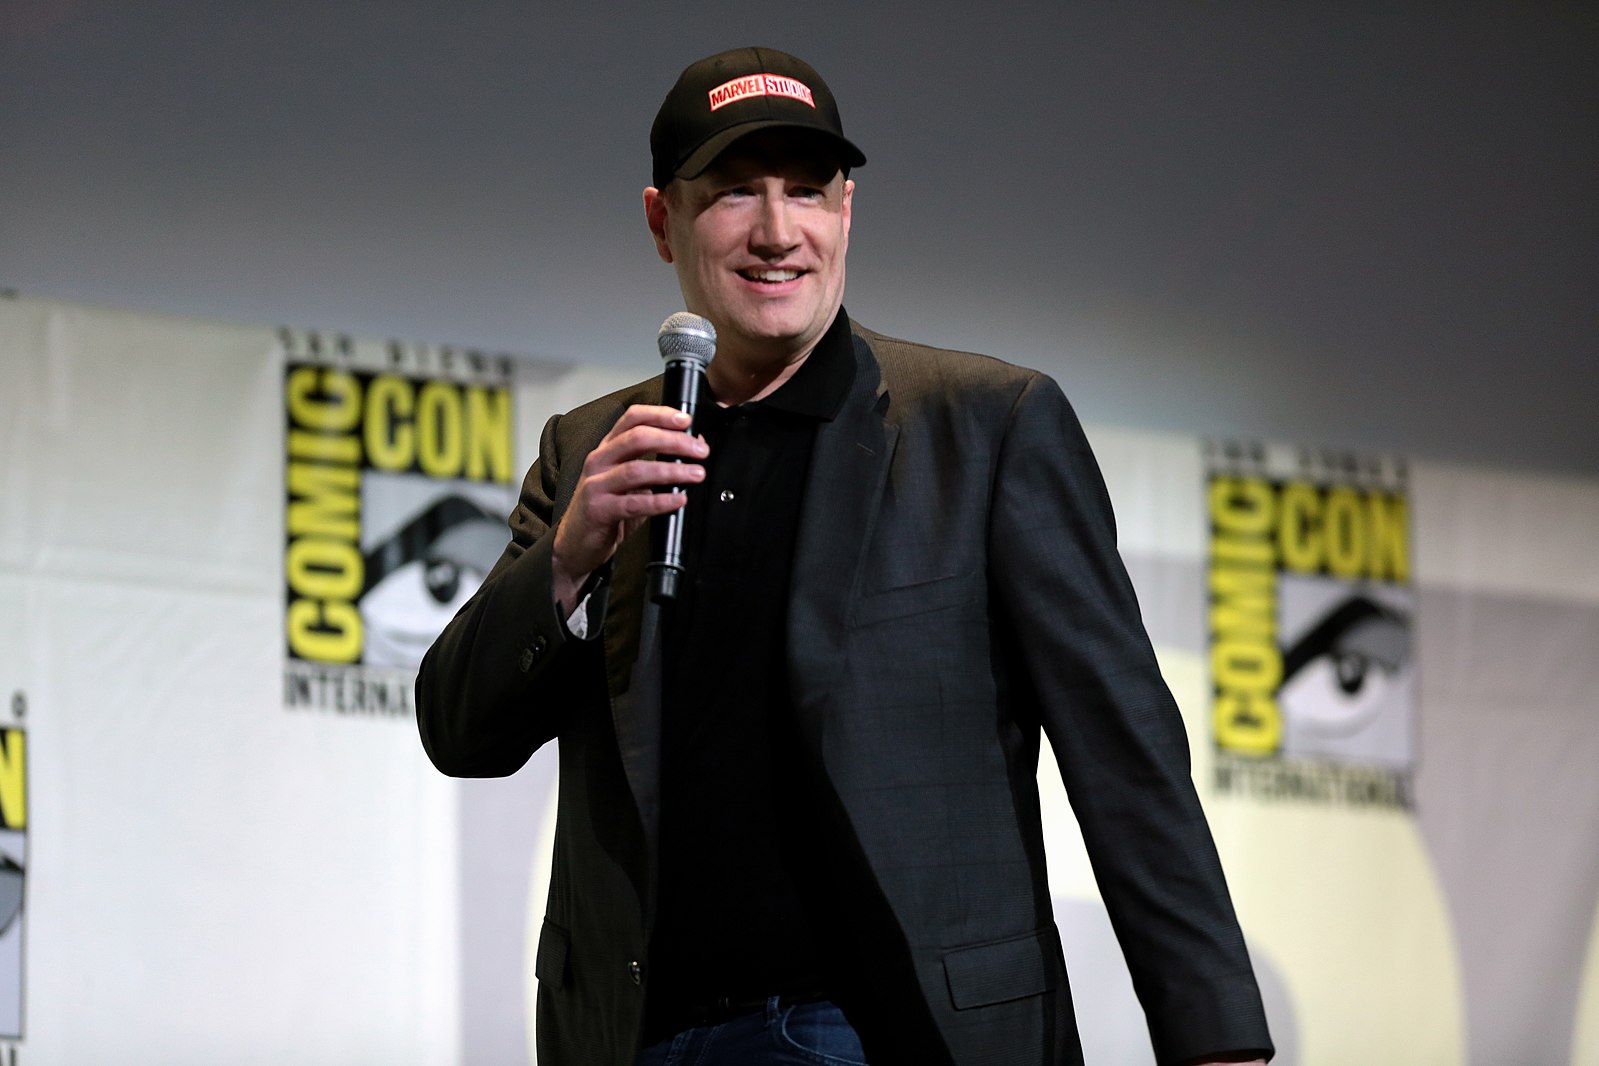 Kevin Feige’s Making A Star Wars Movie: What Could This Mean For The Marvel And Star Wars Franchises?